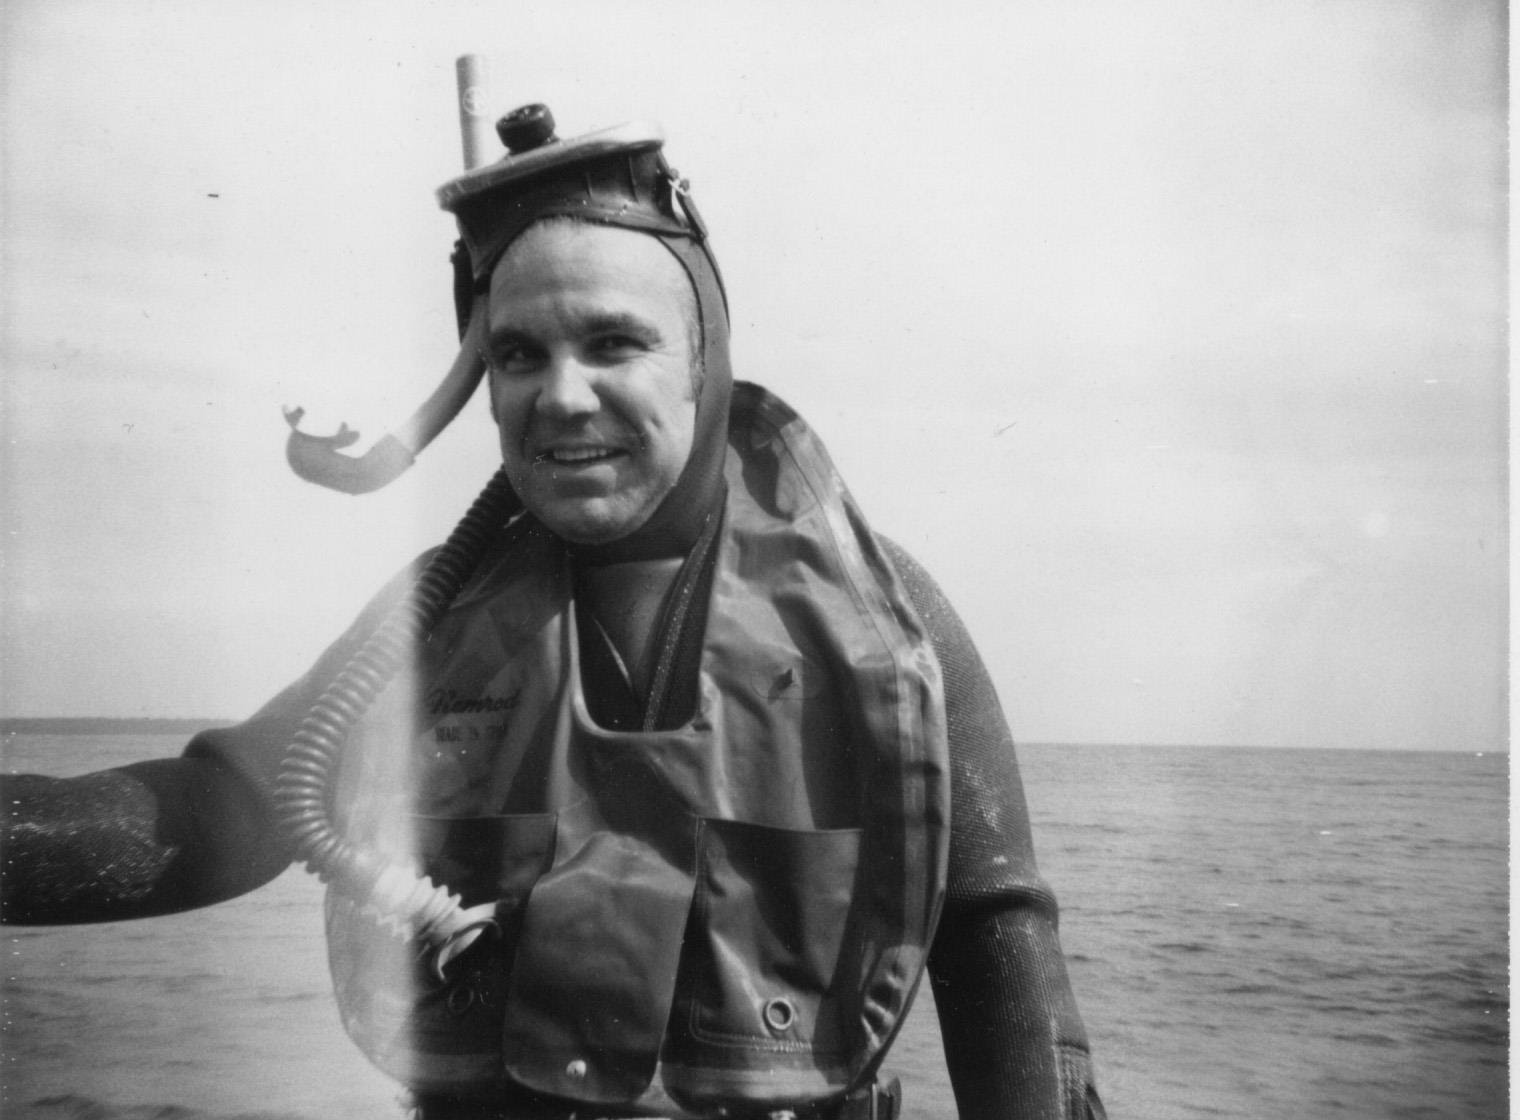 "Dr. Don" DHH MacKenzie diving in the early 1970s